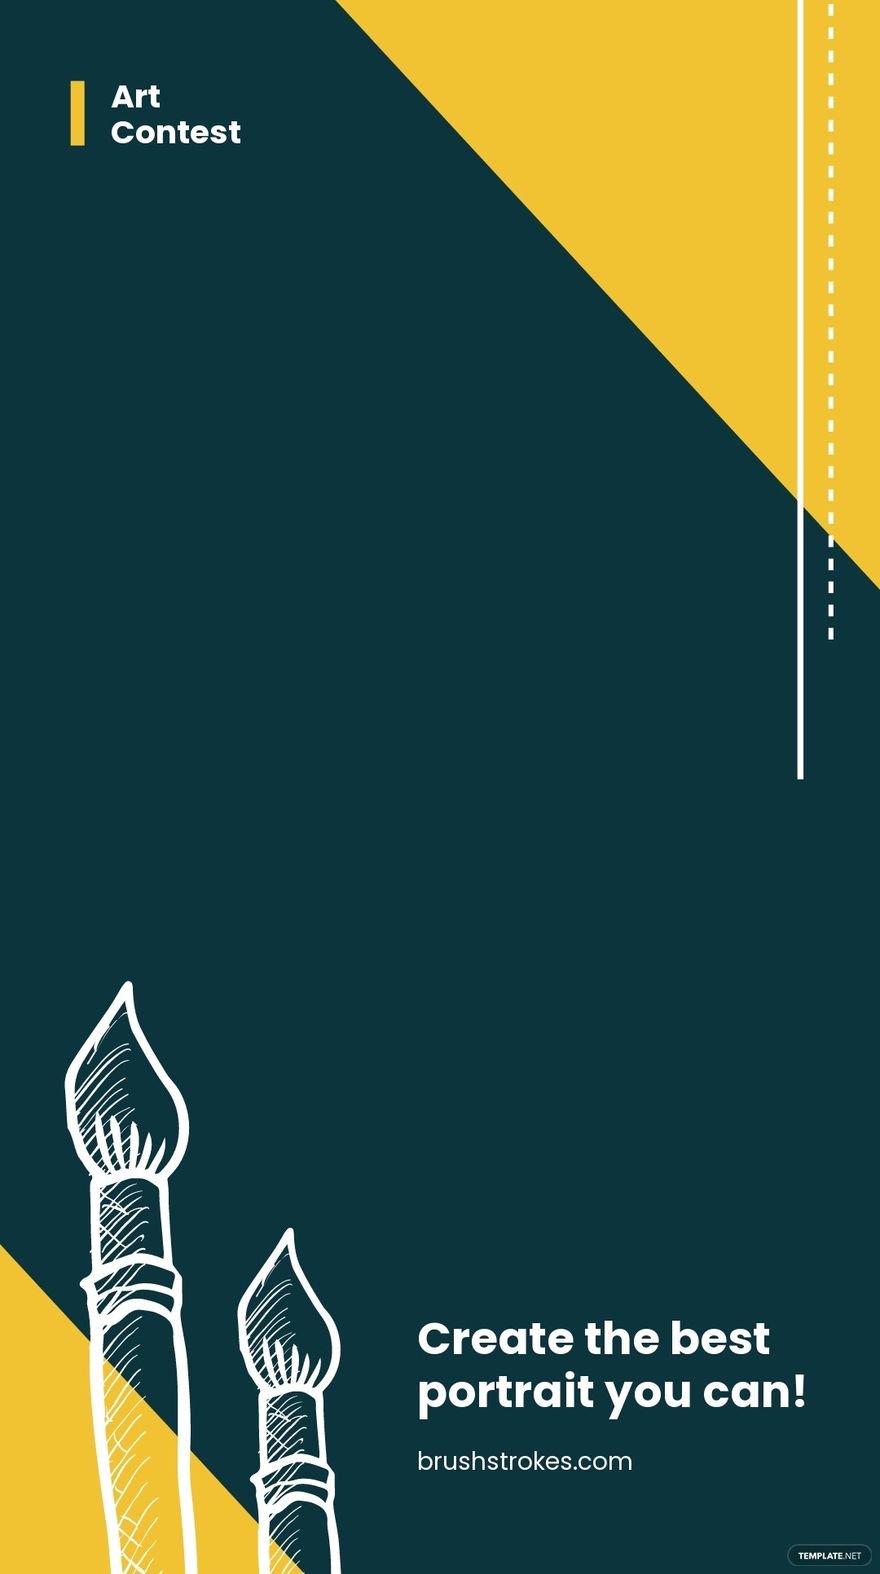 Art Contest Snapchat Geofilter Template